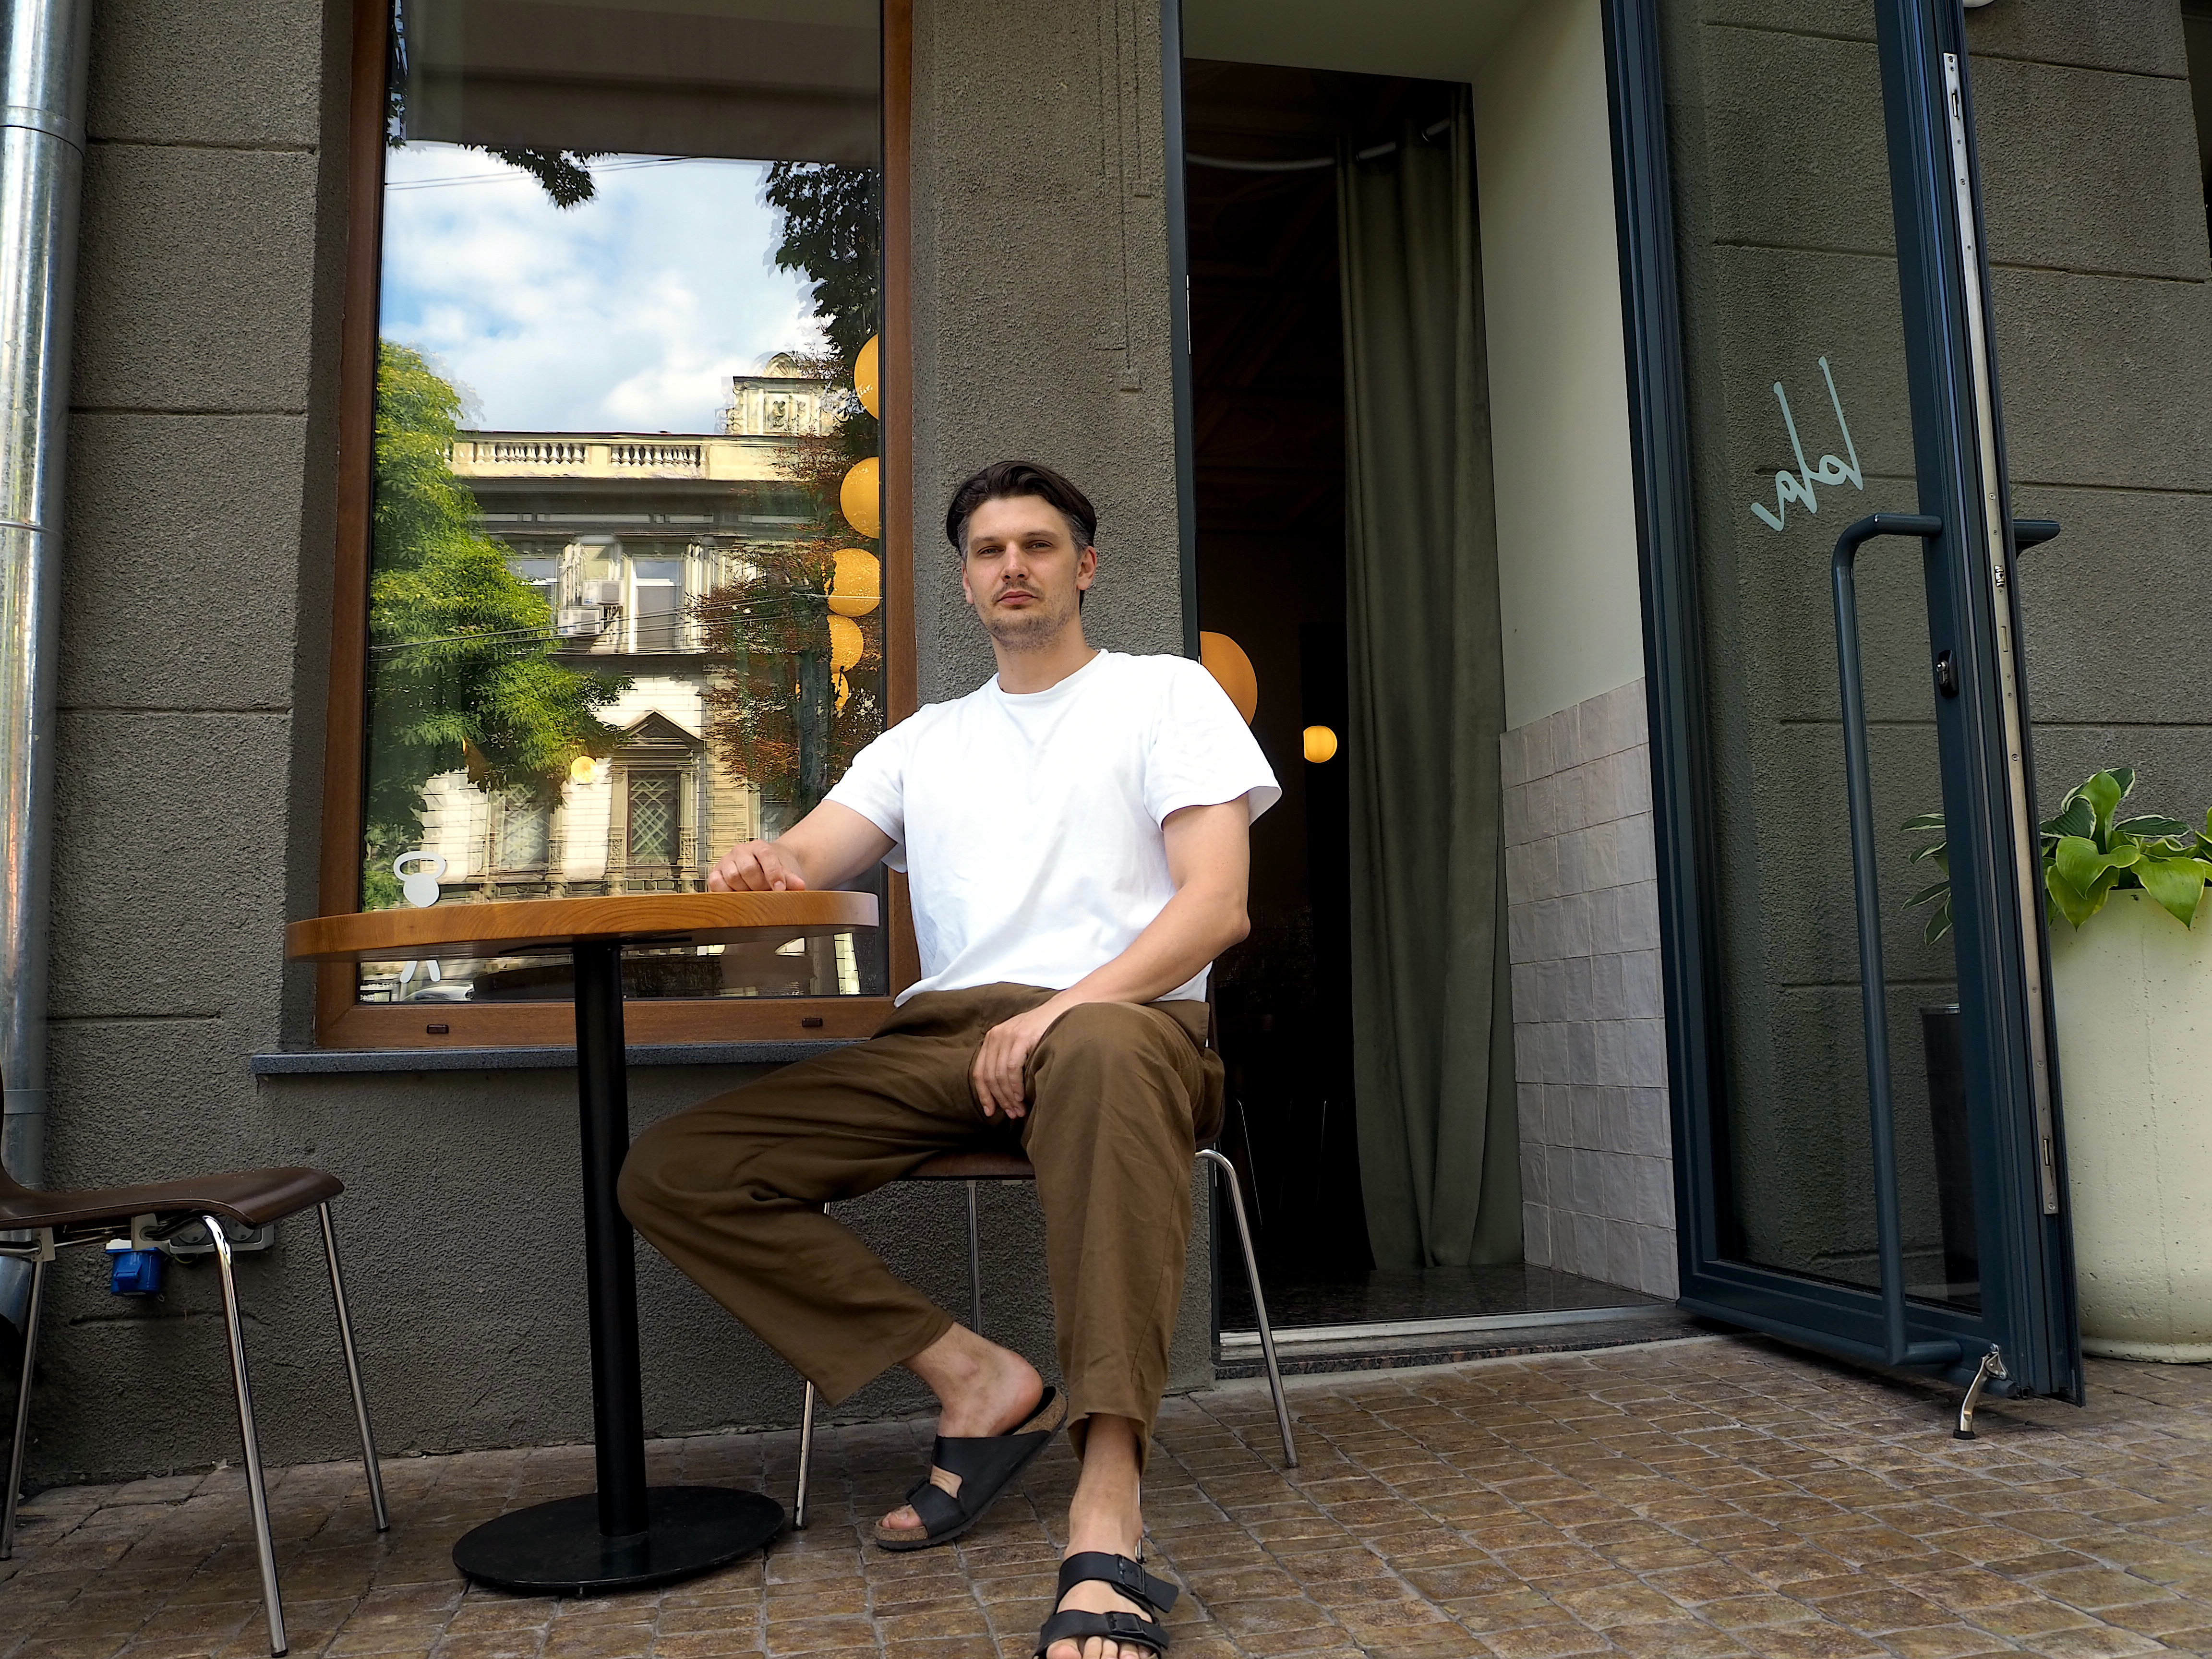 Denys Kalinin, the co-owner of Lola, a French-themed restaurant in the center of Odesa, poses for a photo outside Lola on Aug. 4, 2022. (Alexander Query/The Kyiv Independent)Kalinin said that the drop is mainly due to the lack of tourists in the city.